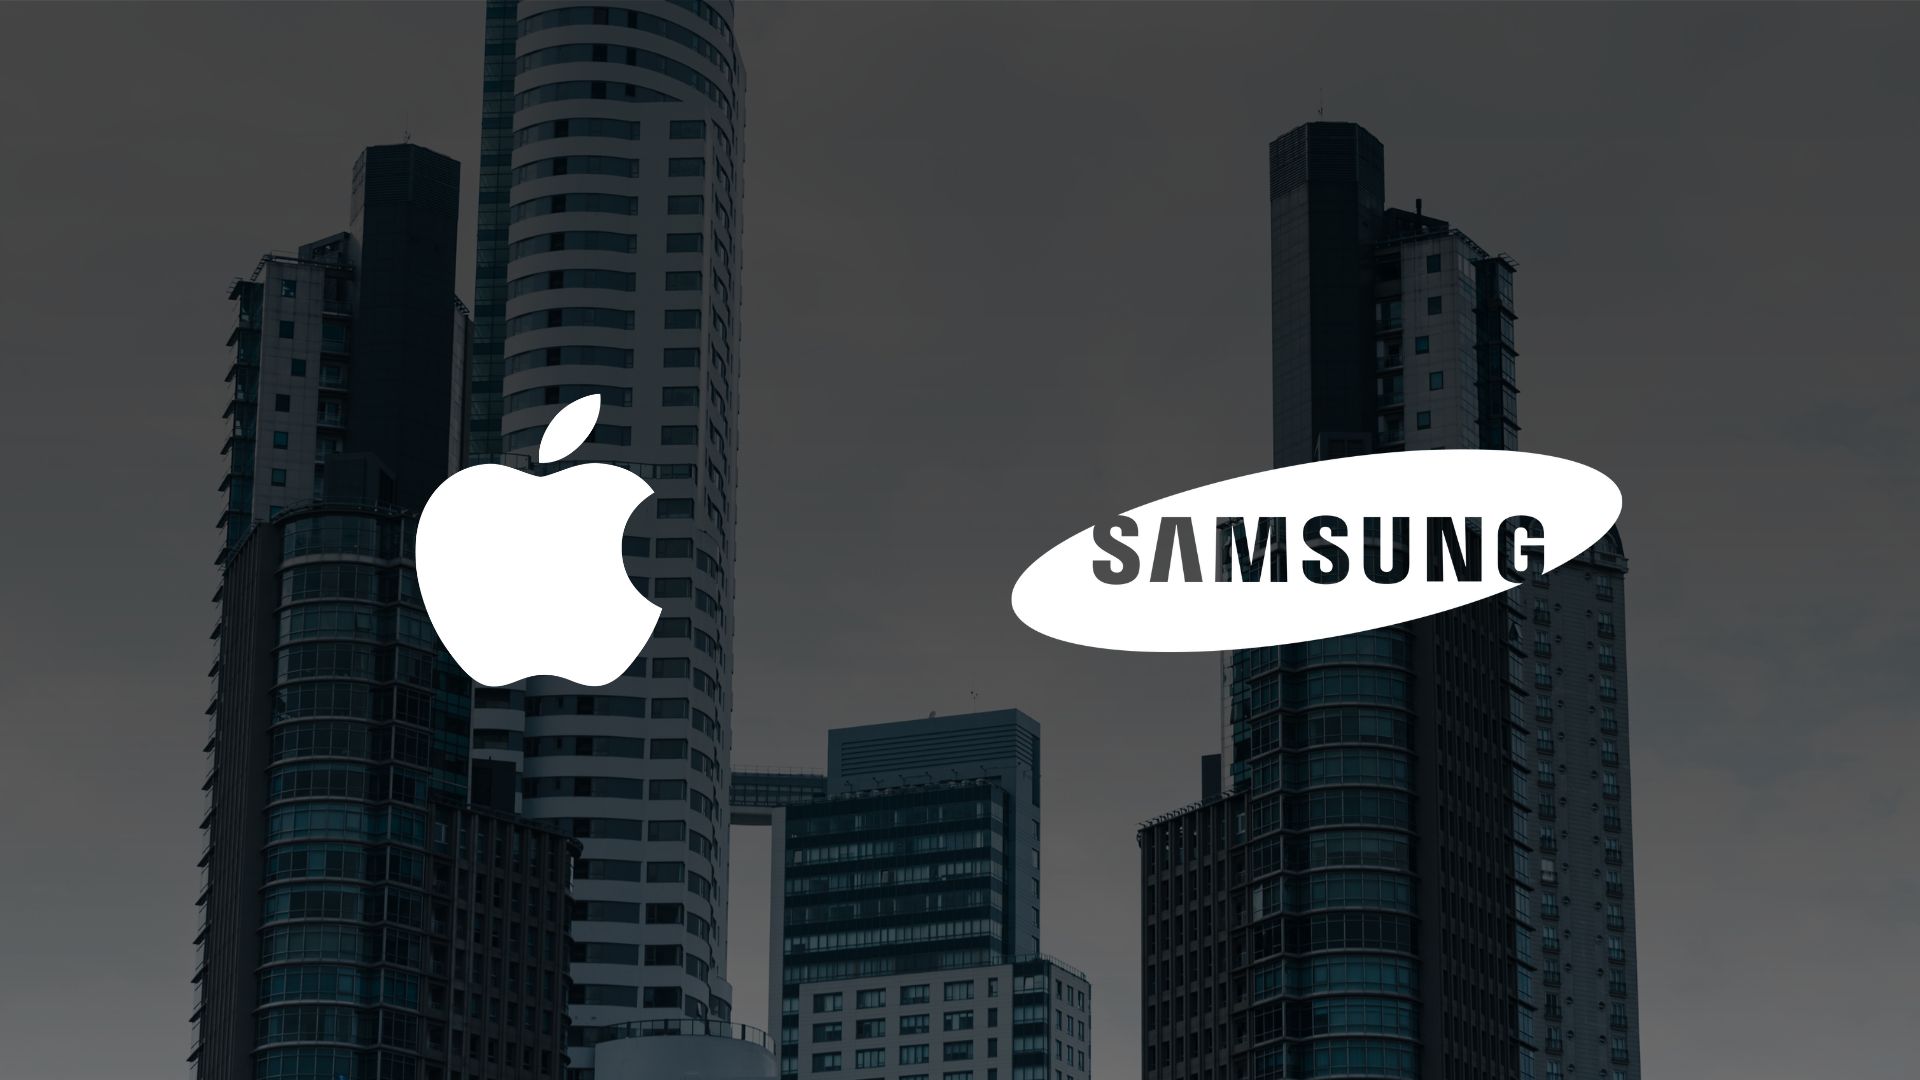 Samsung’s Sneaky Marketing: Apple's New Store Draws Brutal Reaction from $559.09 Trillion-Worth Tech Giant 